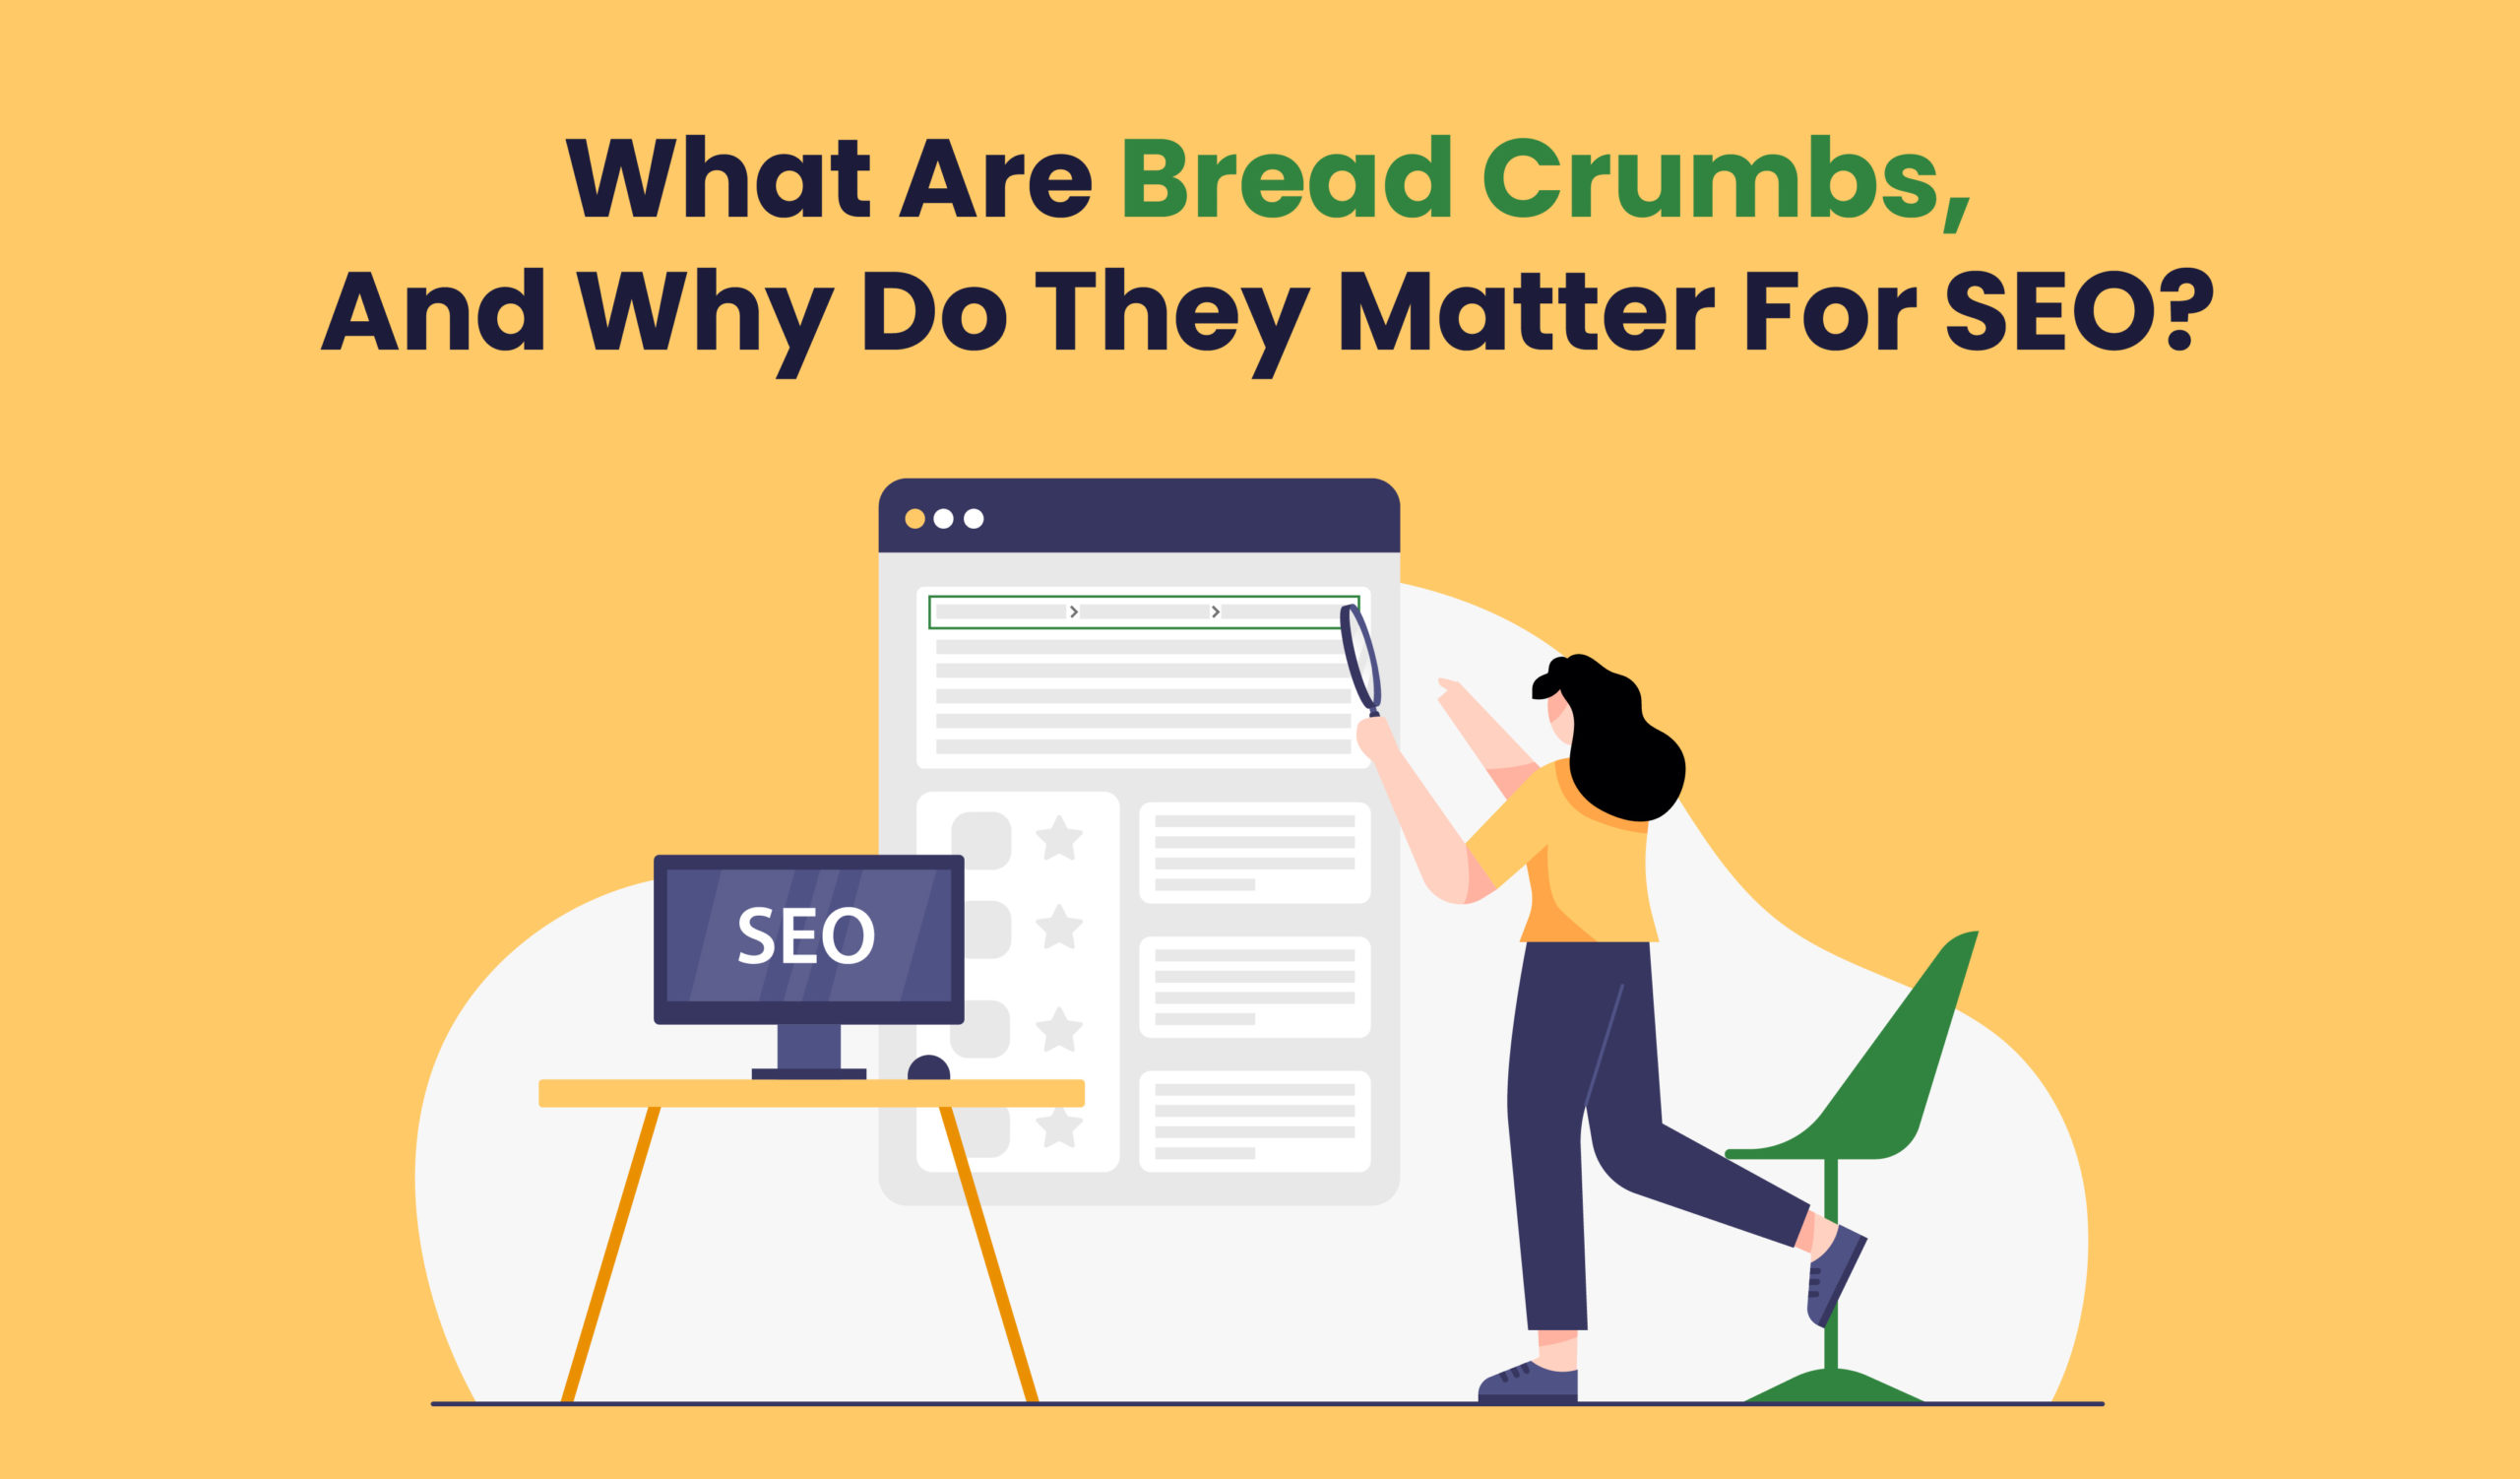 What are breadcrumbs, and why do they matter for SEO?